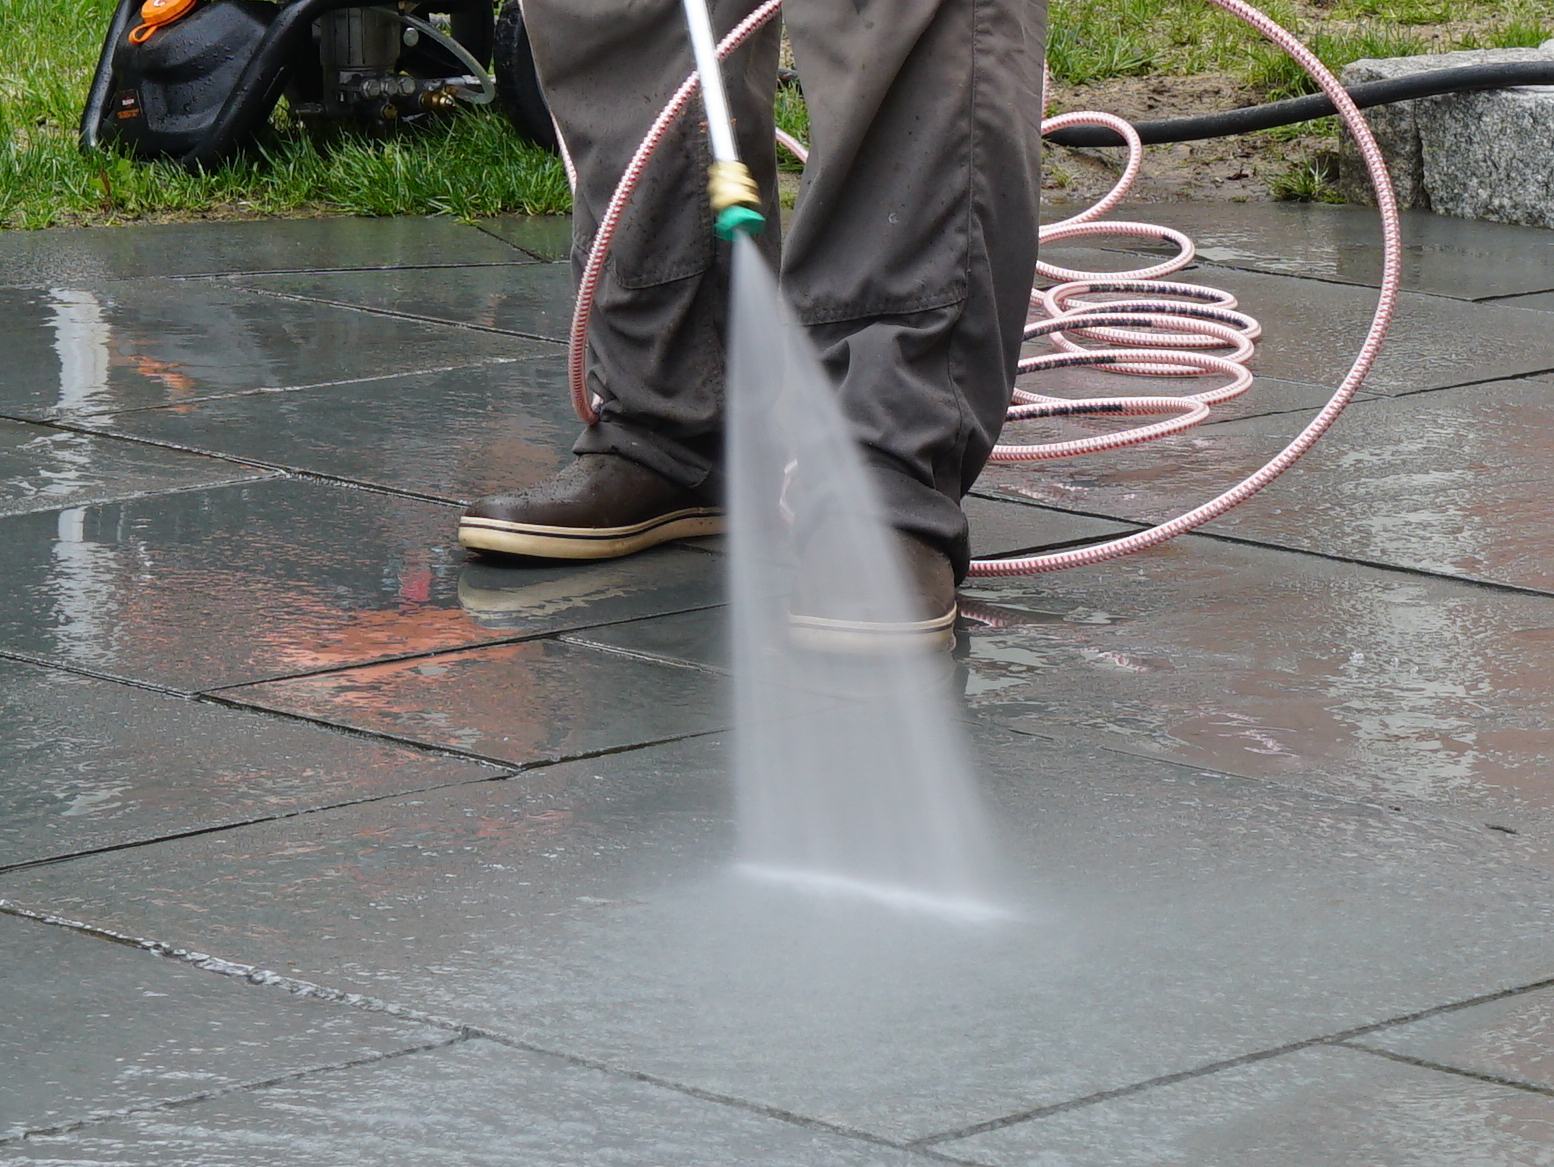 Cleaning A Bluestone Patio Concord, What Is The Best Way To Clean Bluestone Patio